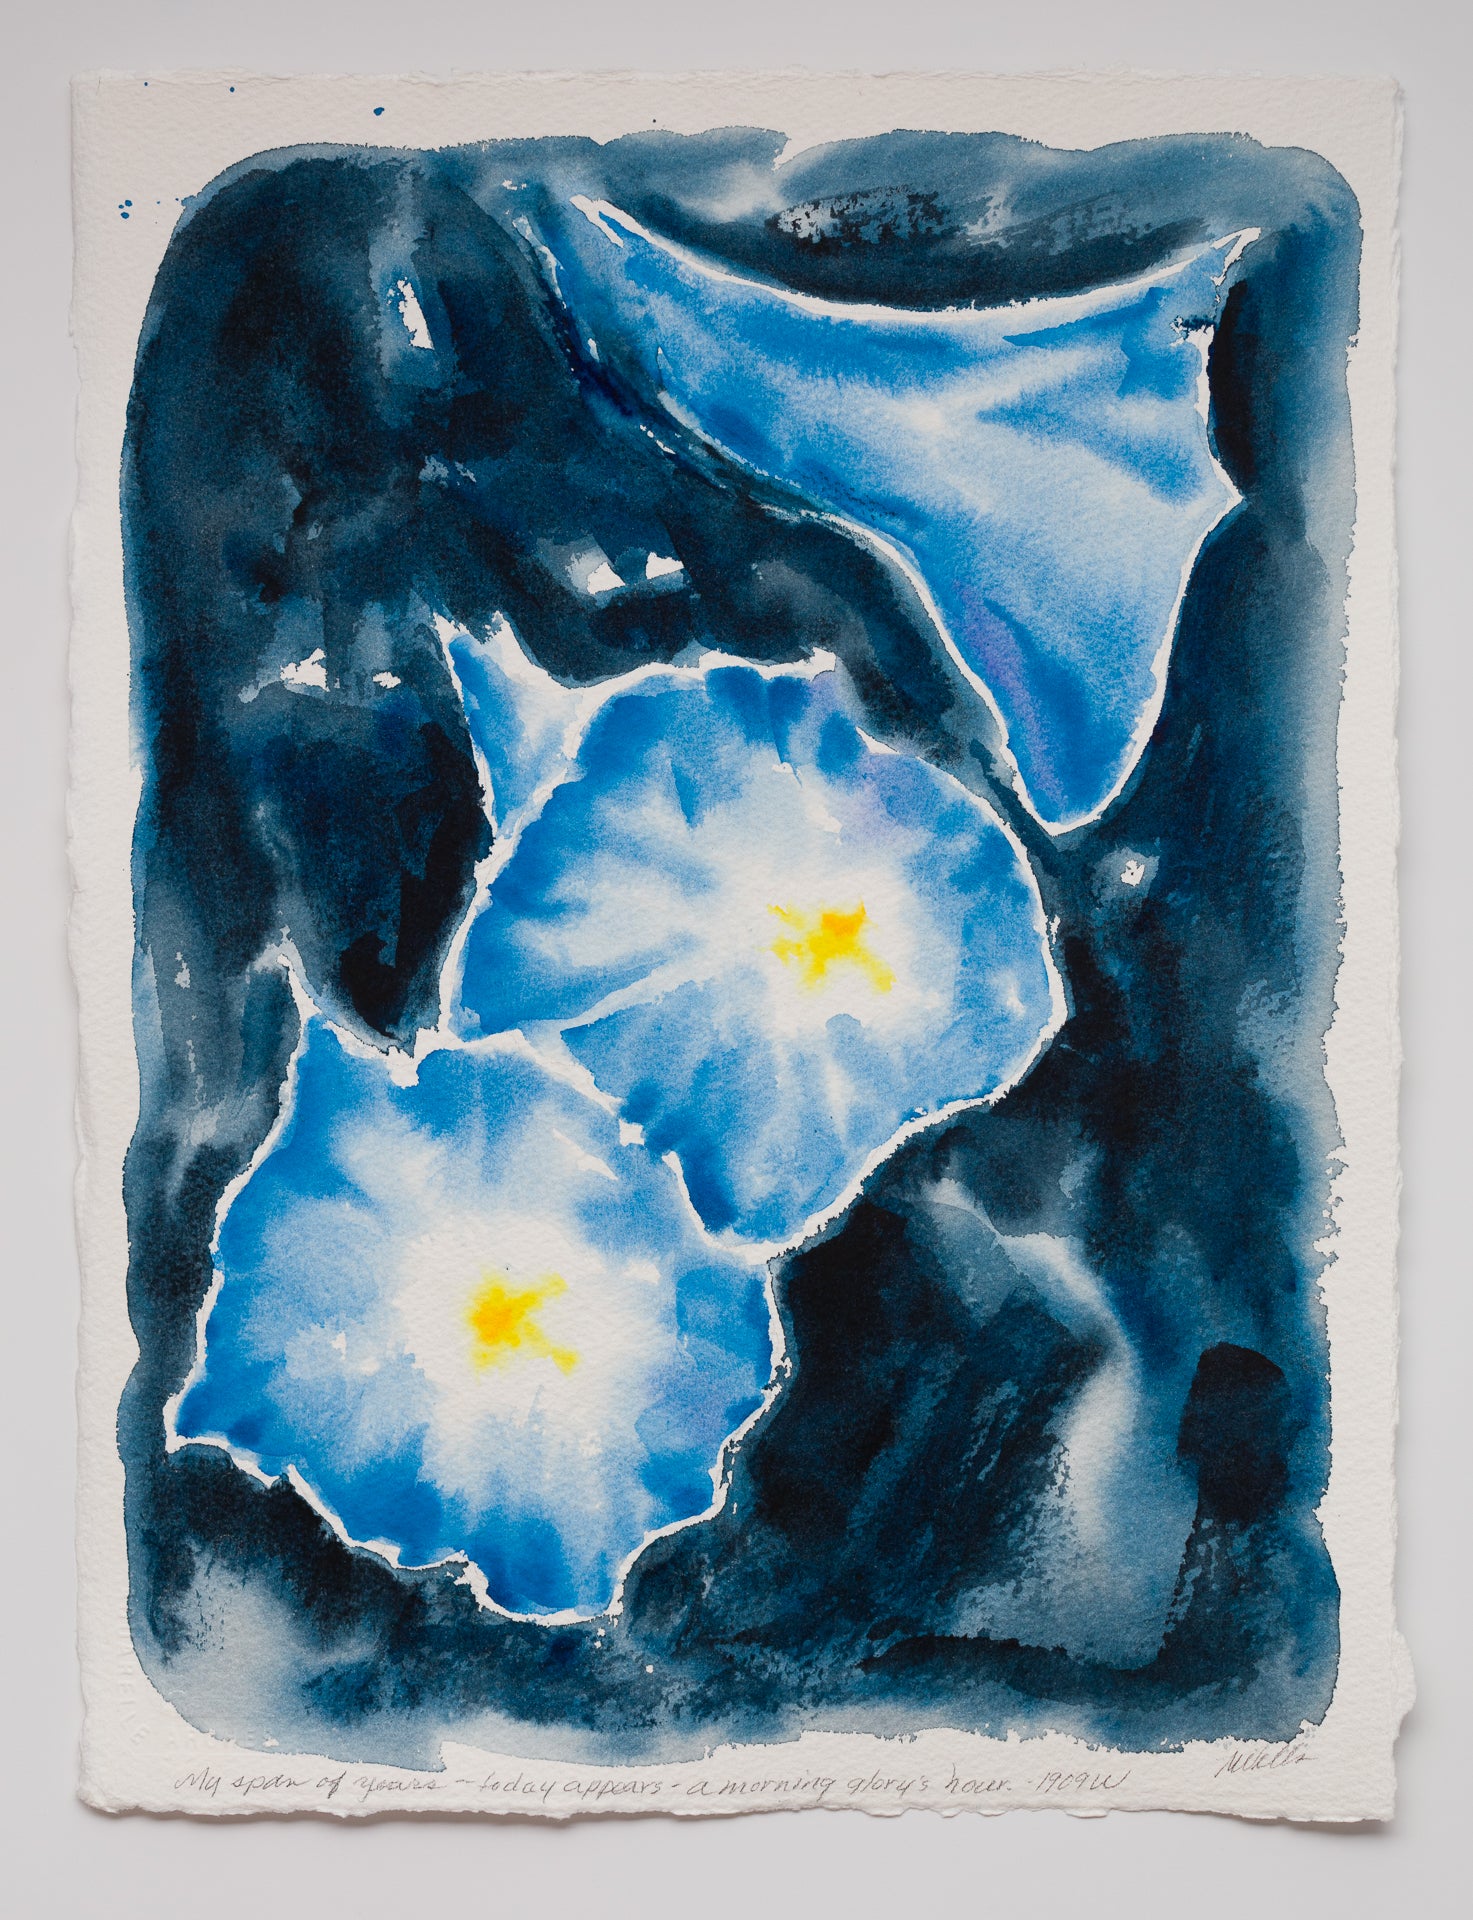 "A Morning Glory's Hour" by Marilyn Wells - Prints of Original Watercolor